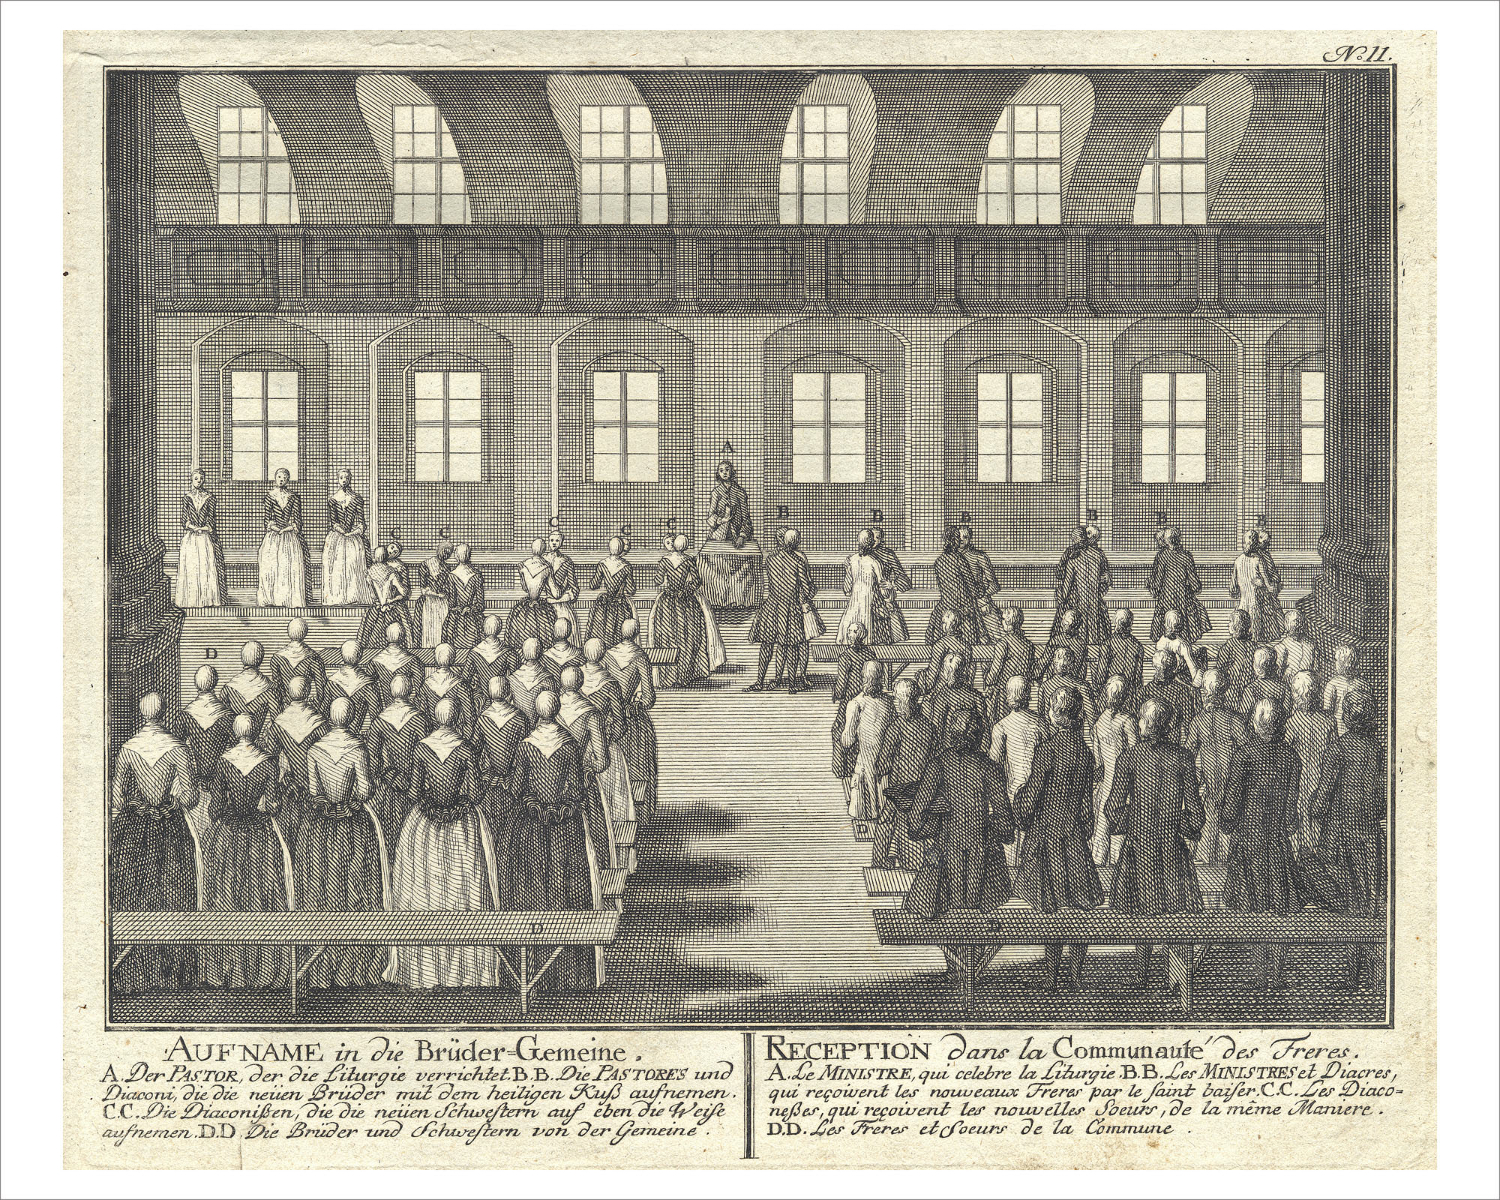 18th century Moravian illustration of the reception of new brothers